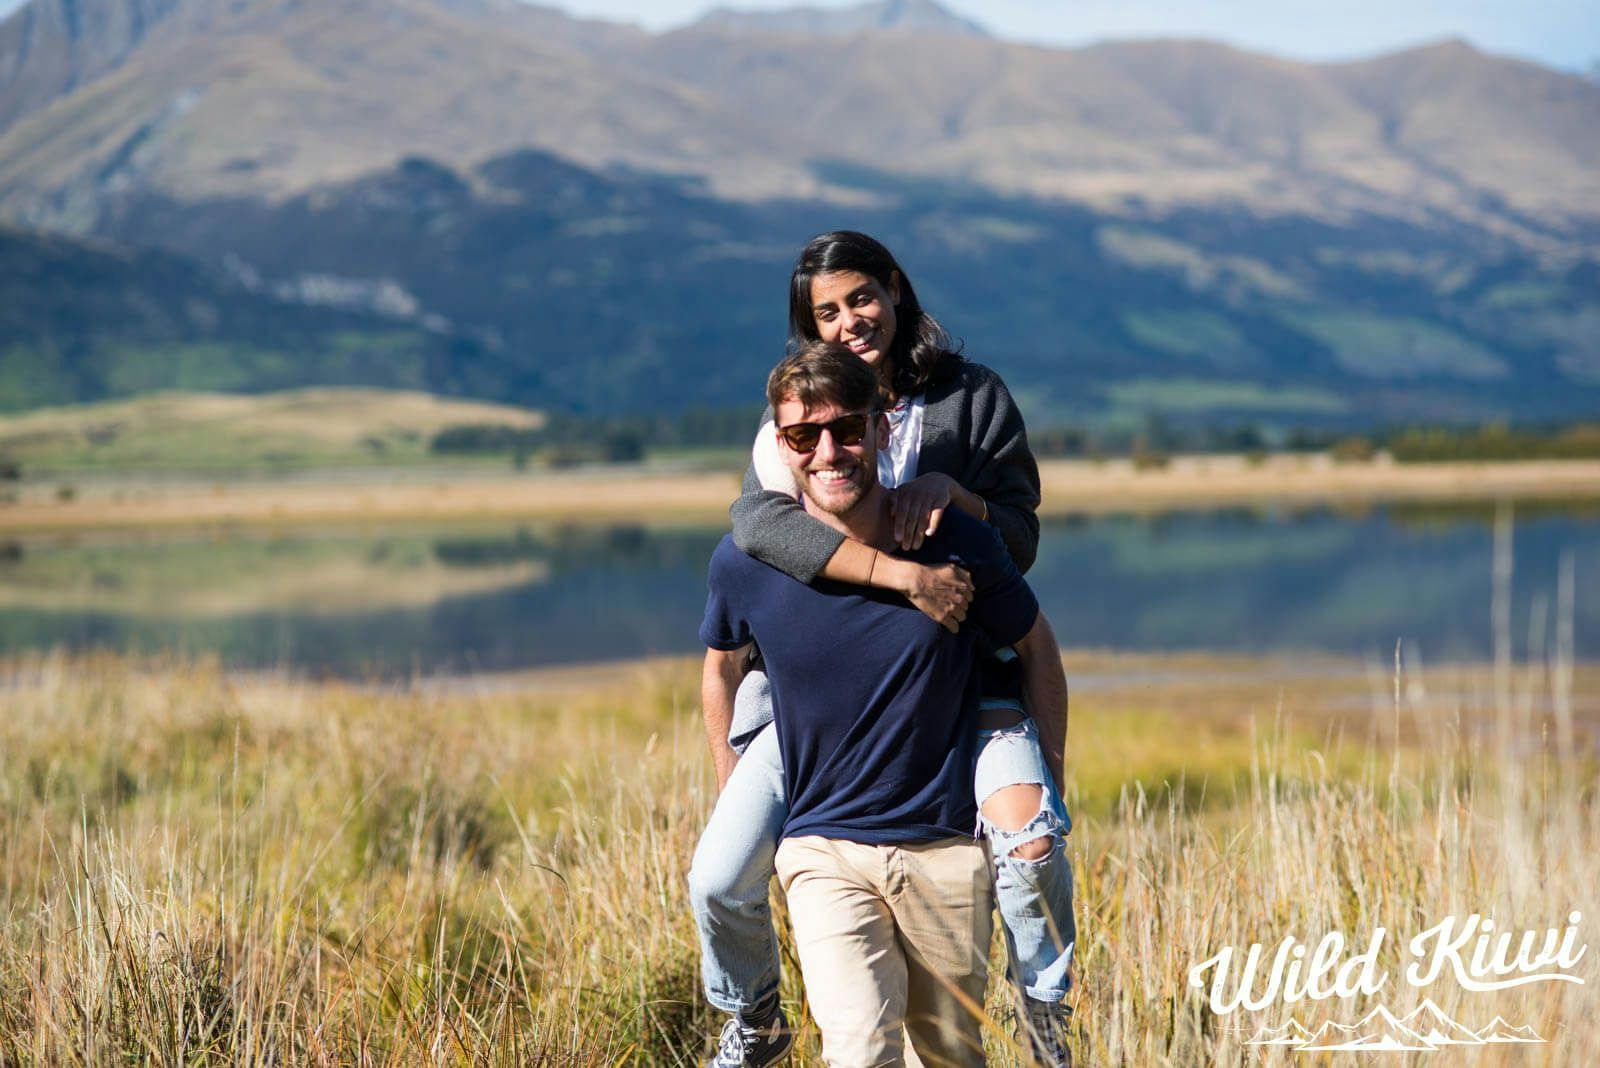 Travelling in New Zealand - A backpacker's adventure of a lifetime